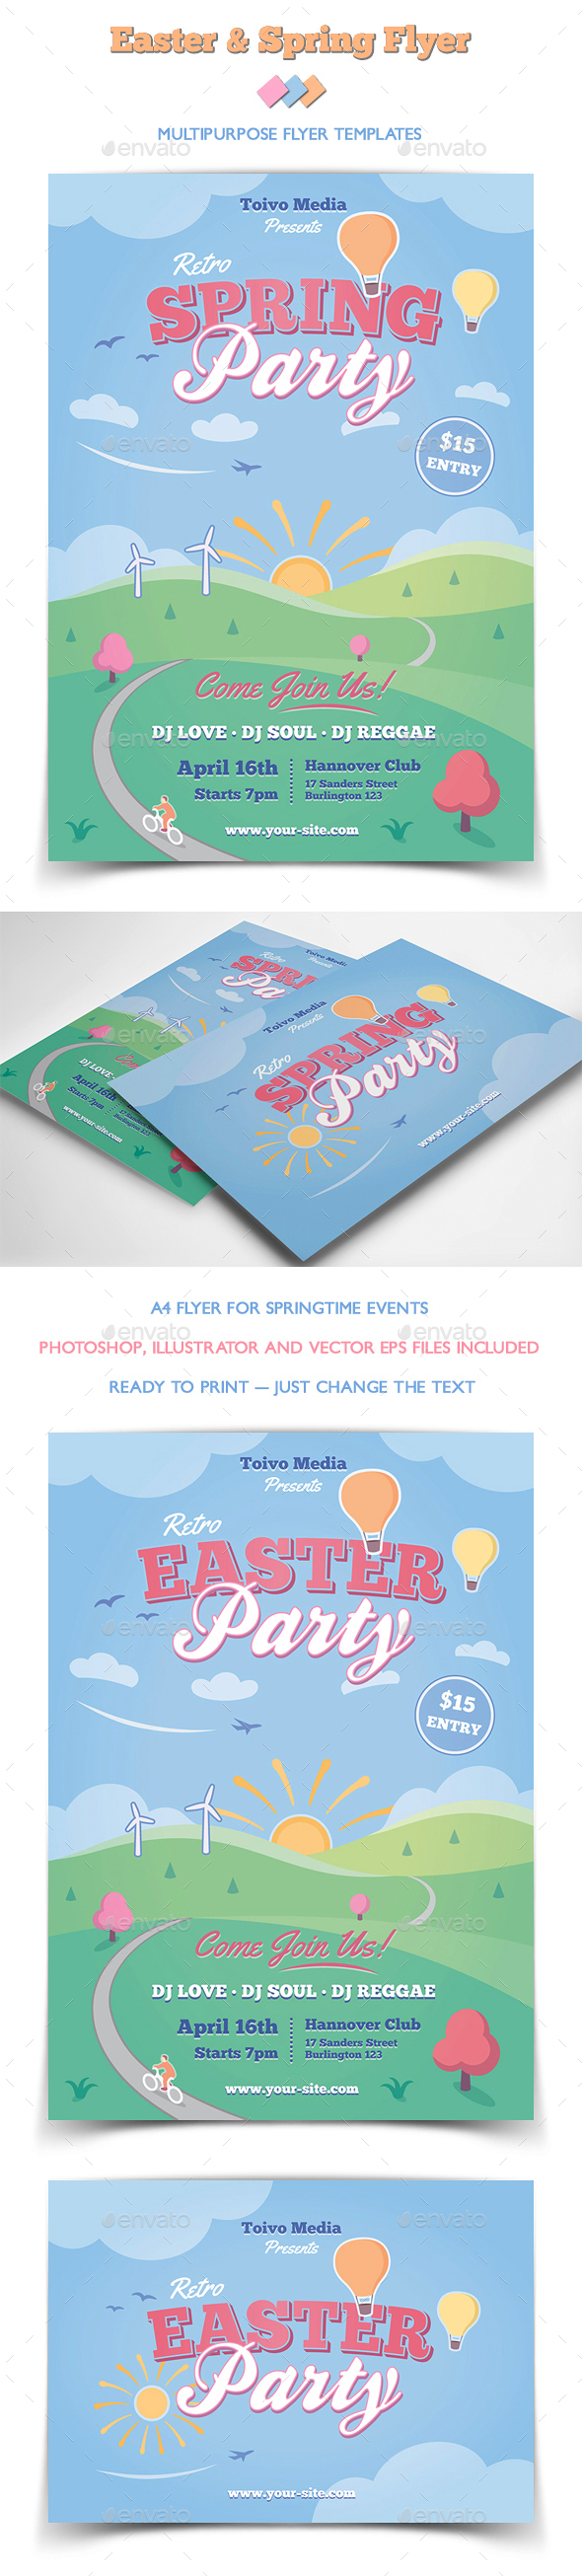 Easter and Spring Flyer